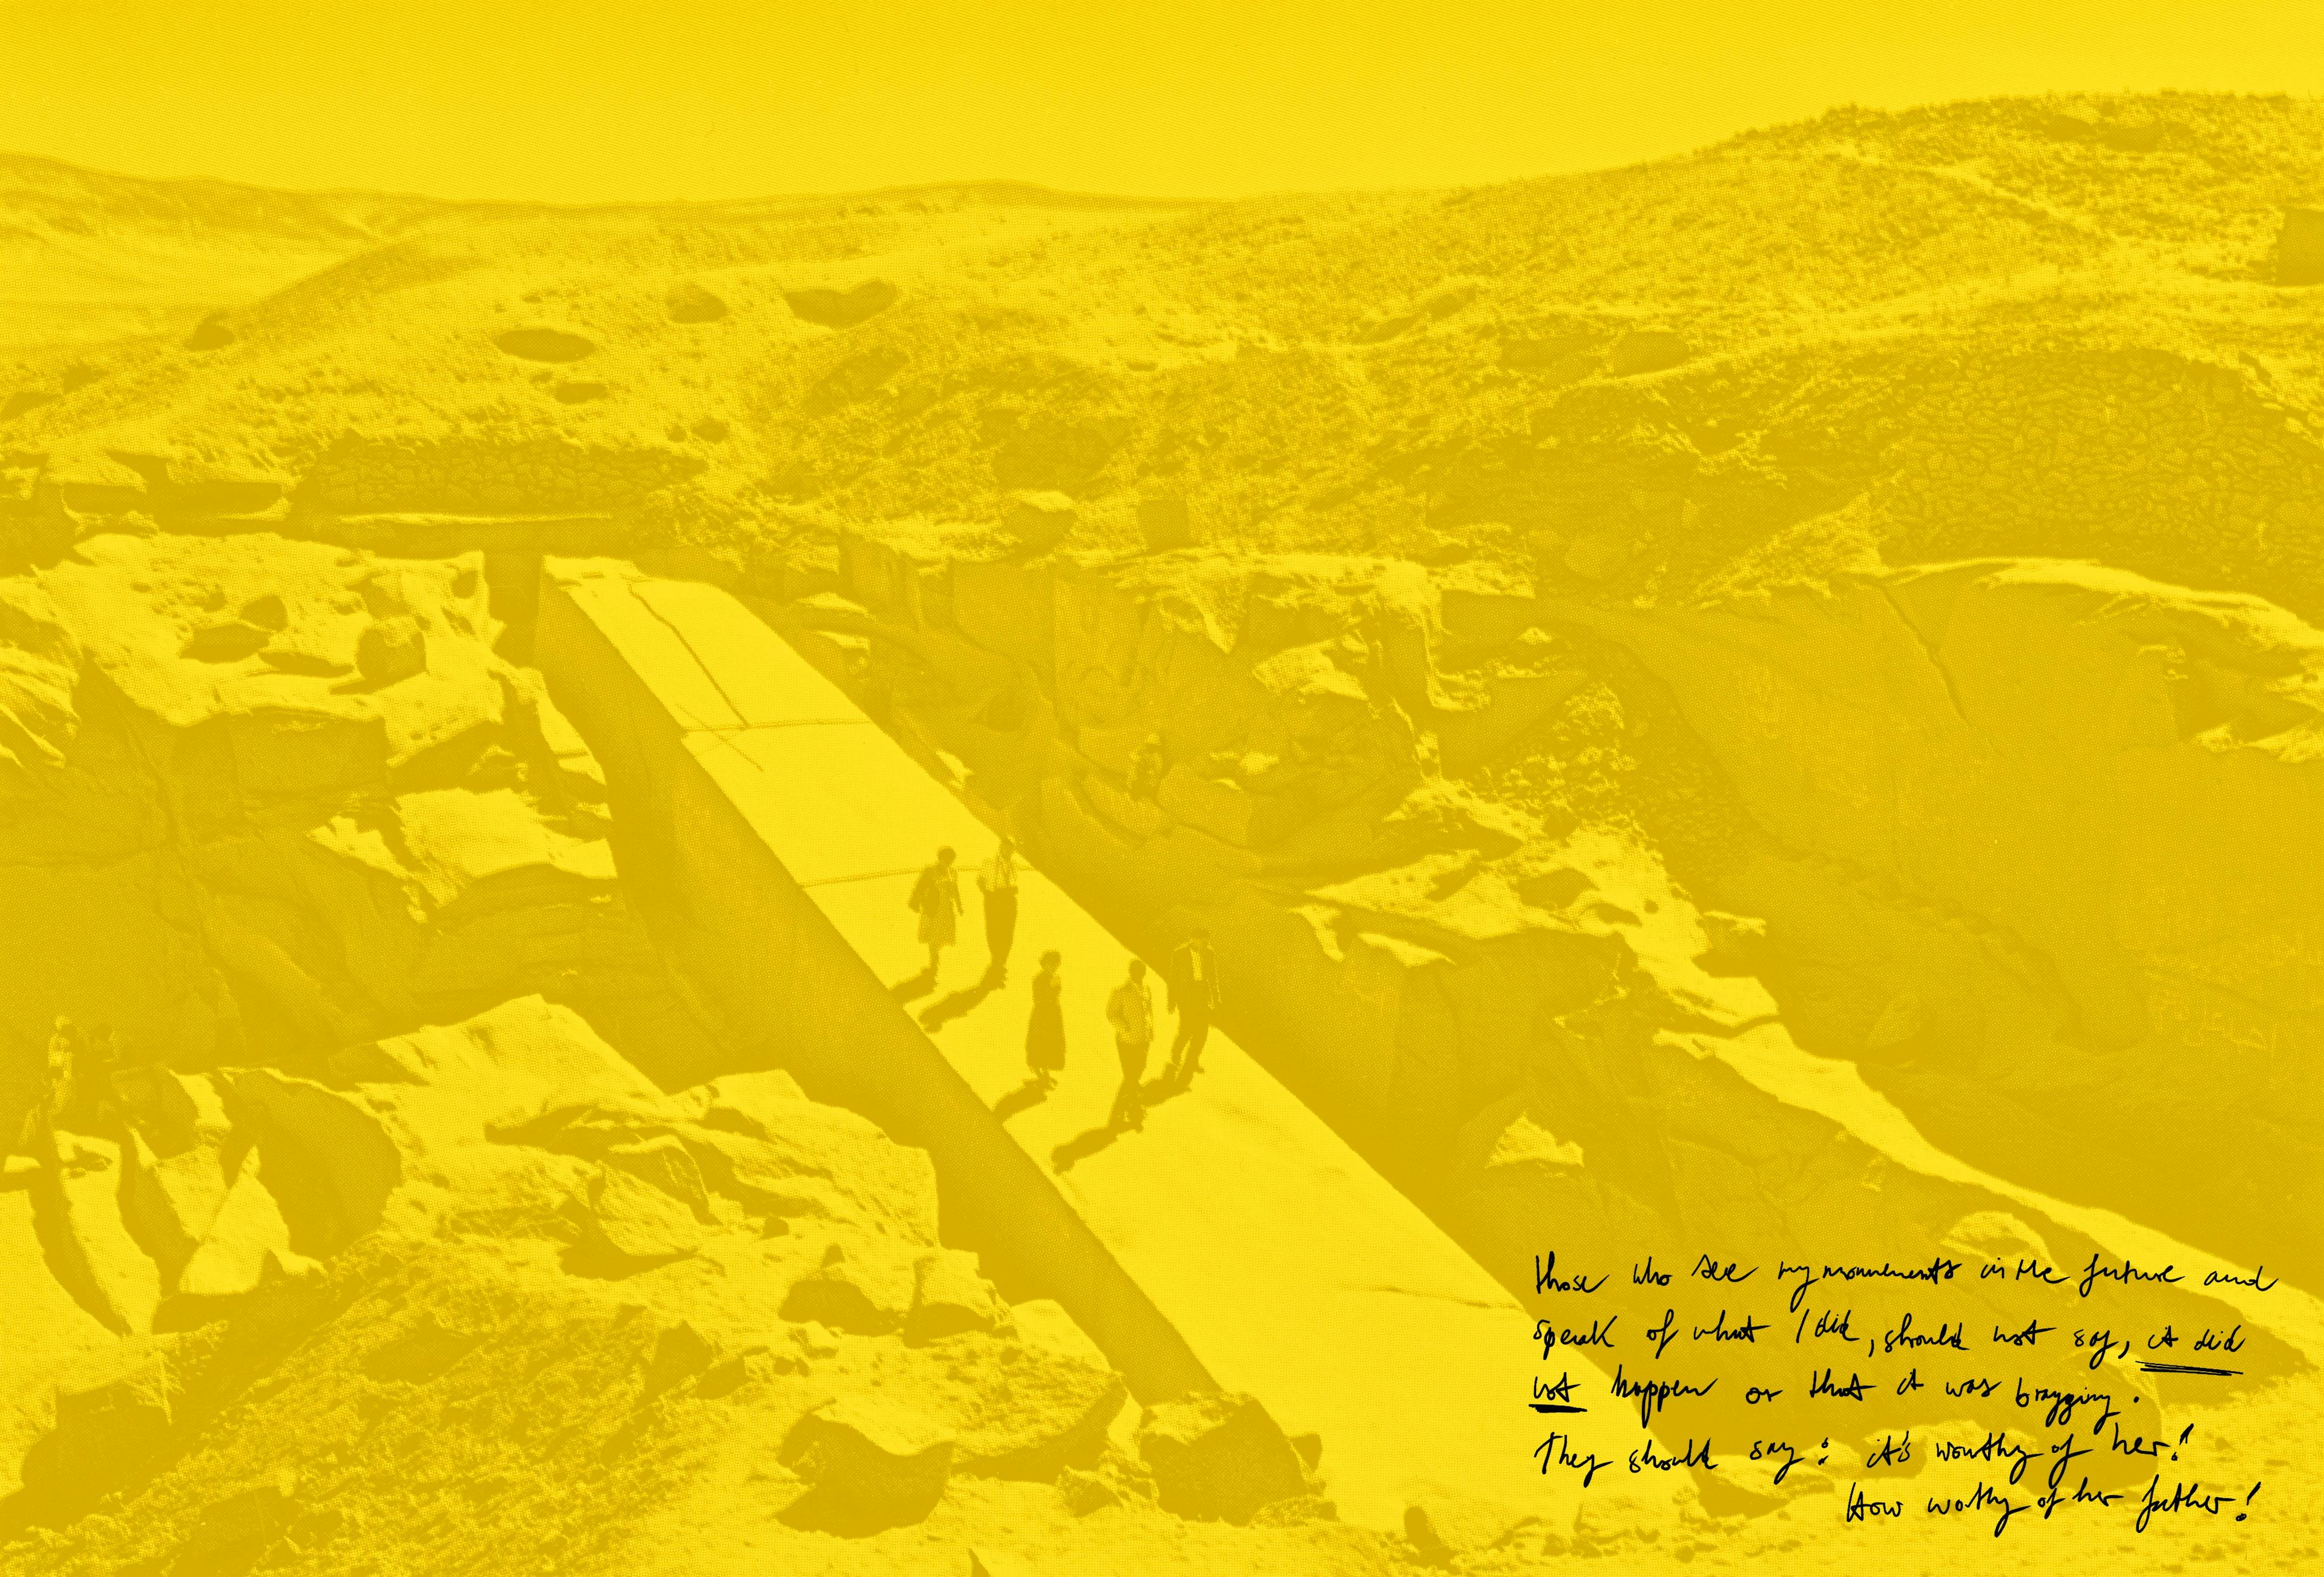 Postcard with writing on the lower left corner, showing a group of people walking around Egyptian ruins. Yellow filter